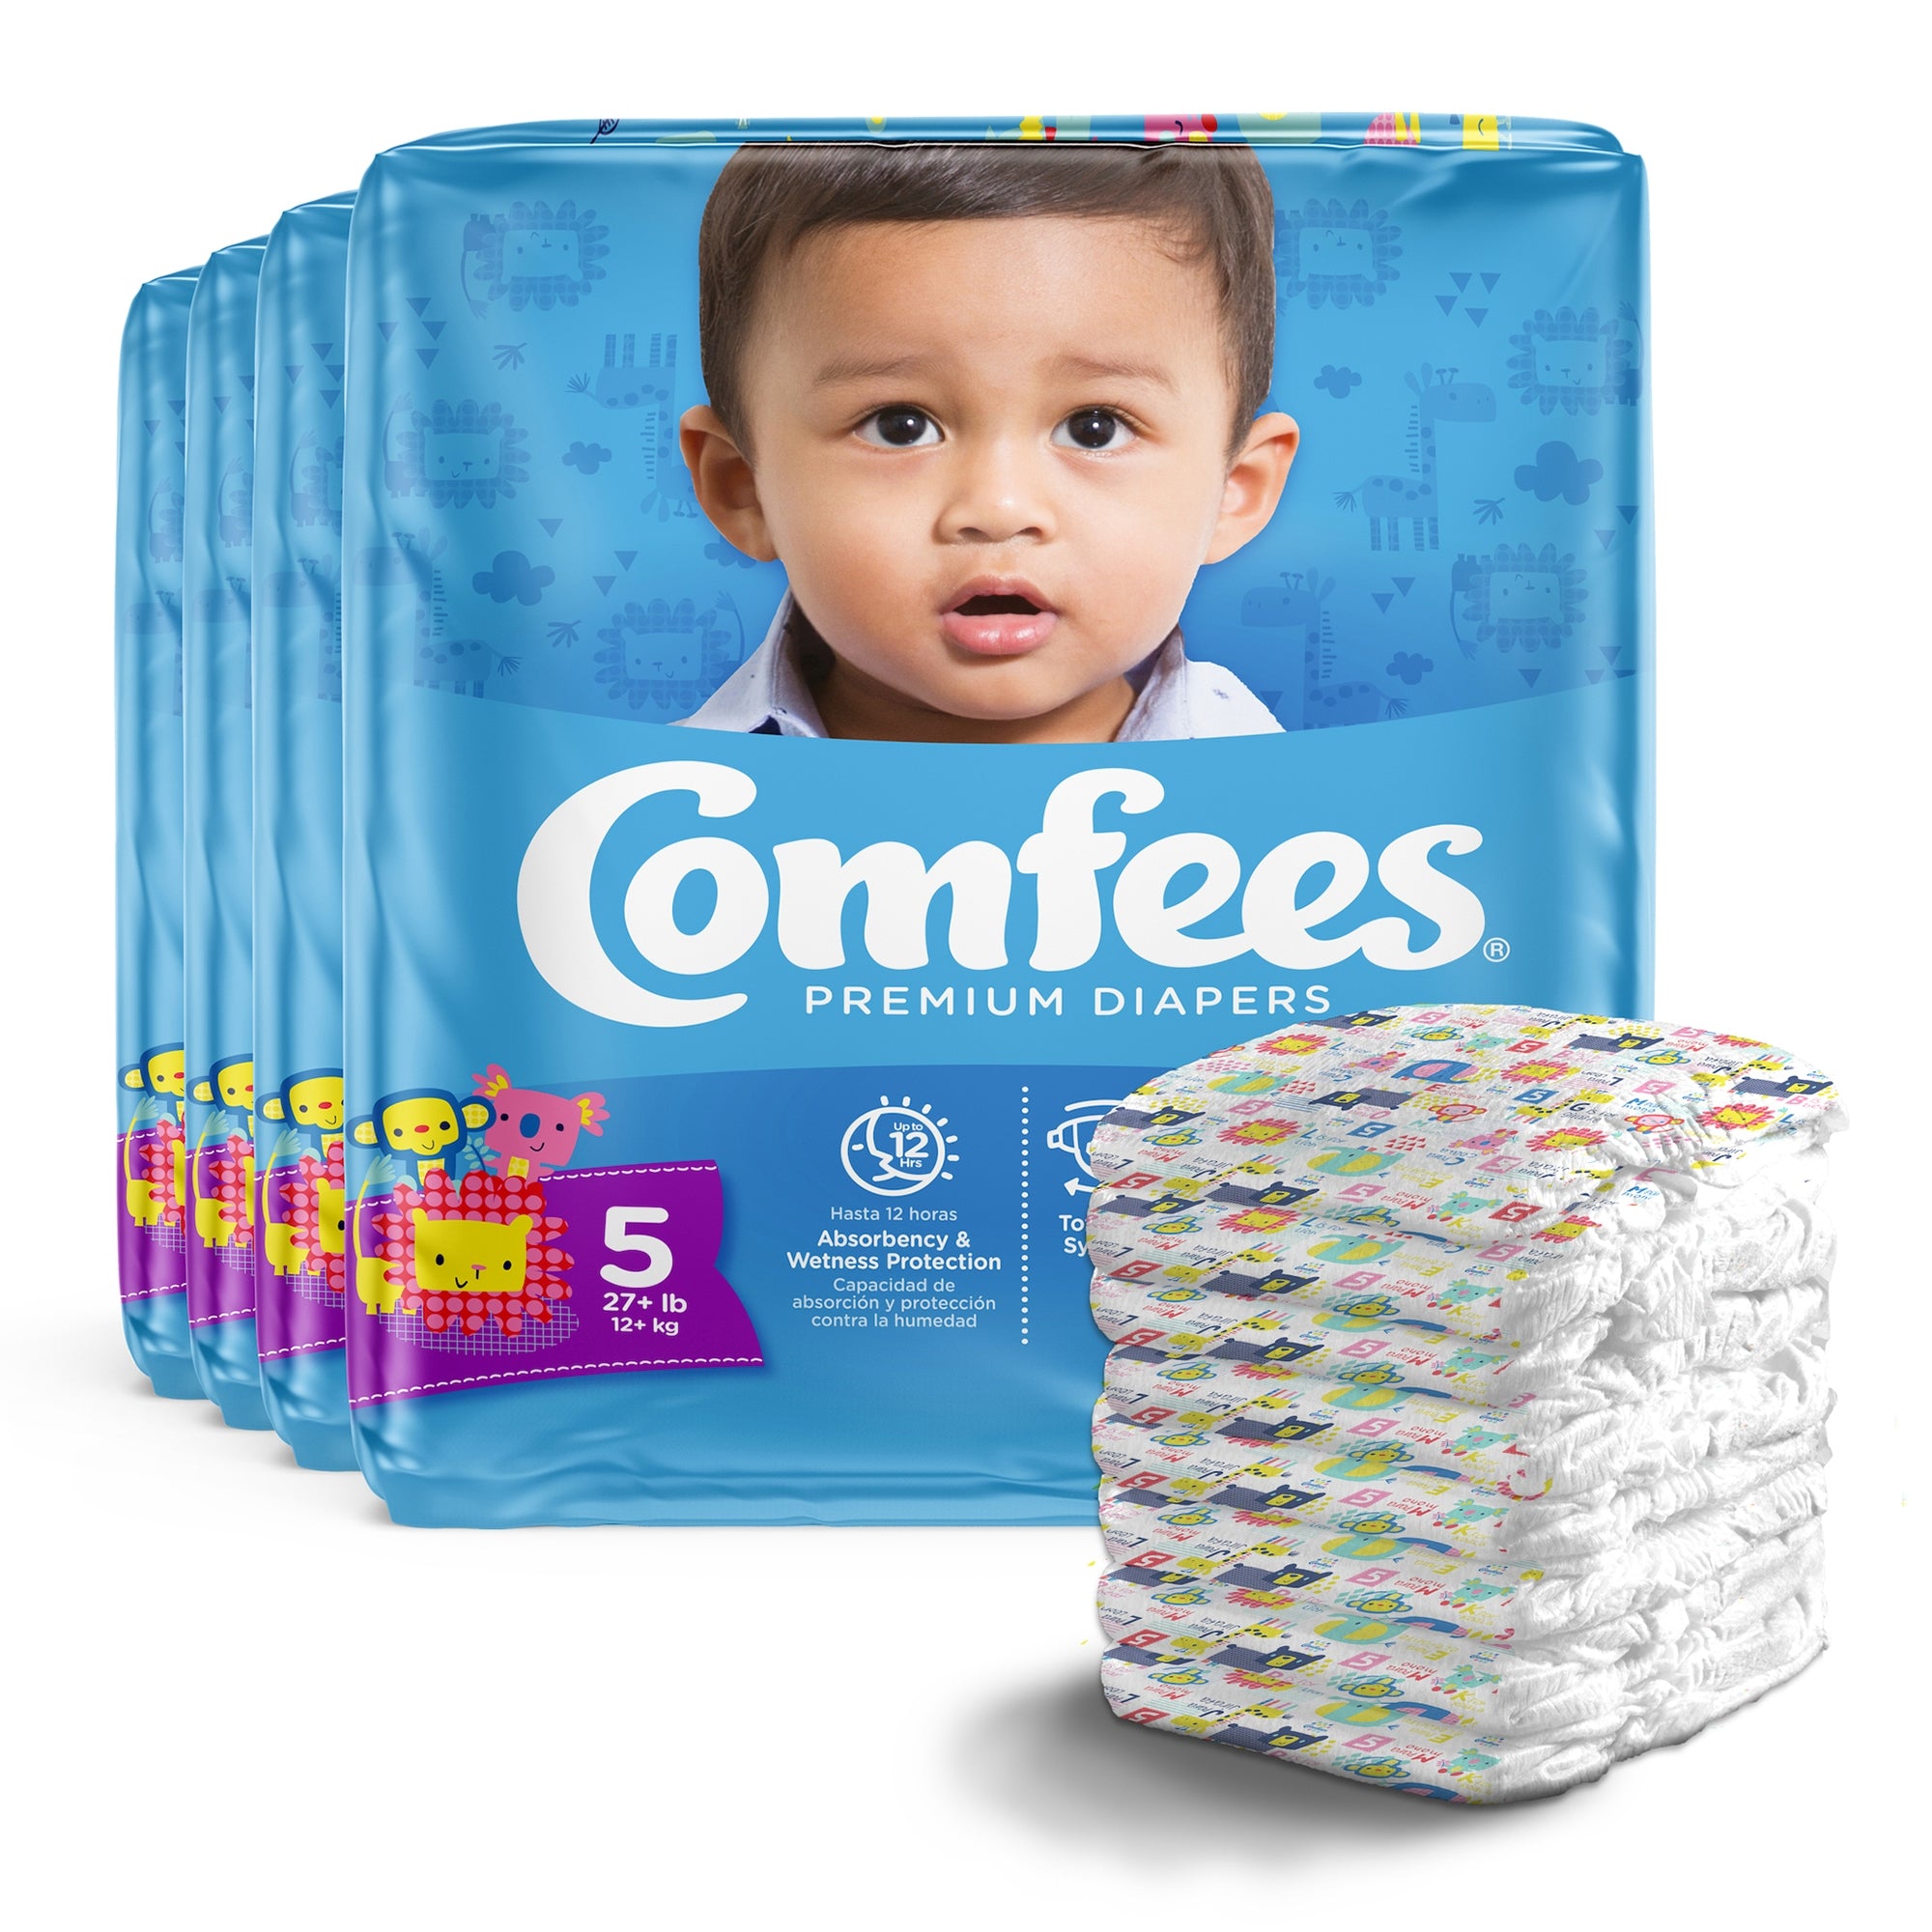 Unisex Baby Diaper Comfees Size 5 Disposable Moderate Absorbency